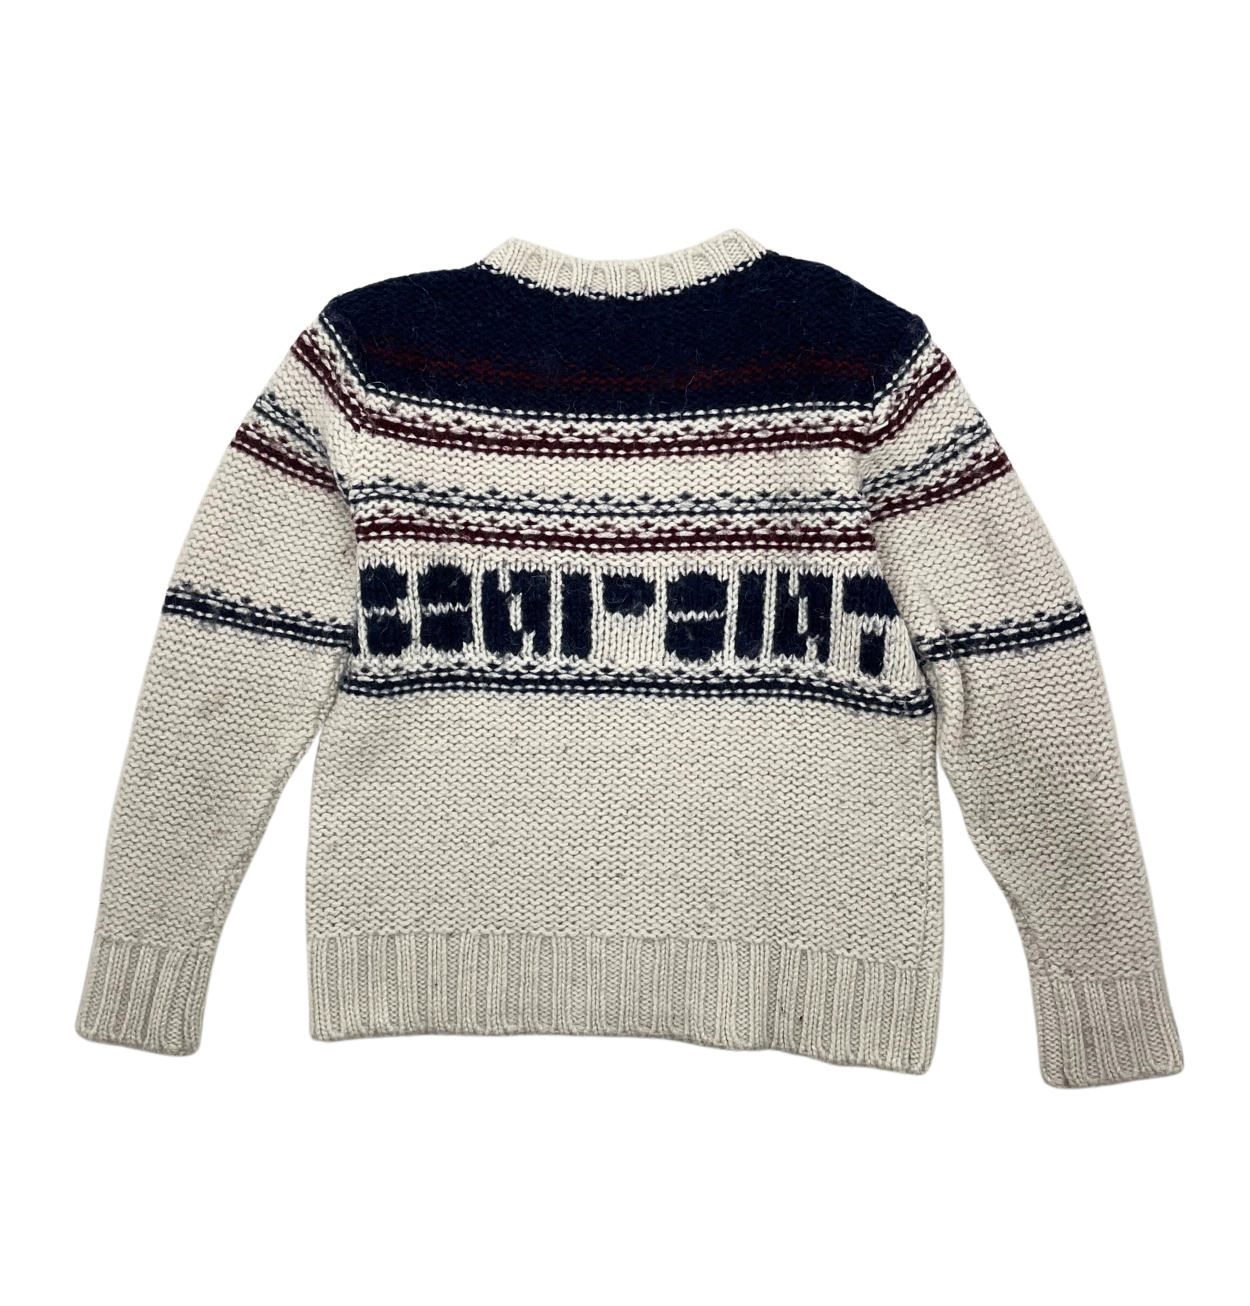 BONPOINT - Thick patterned jumper - 8 years old